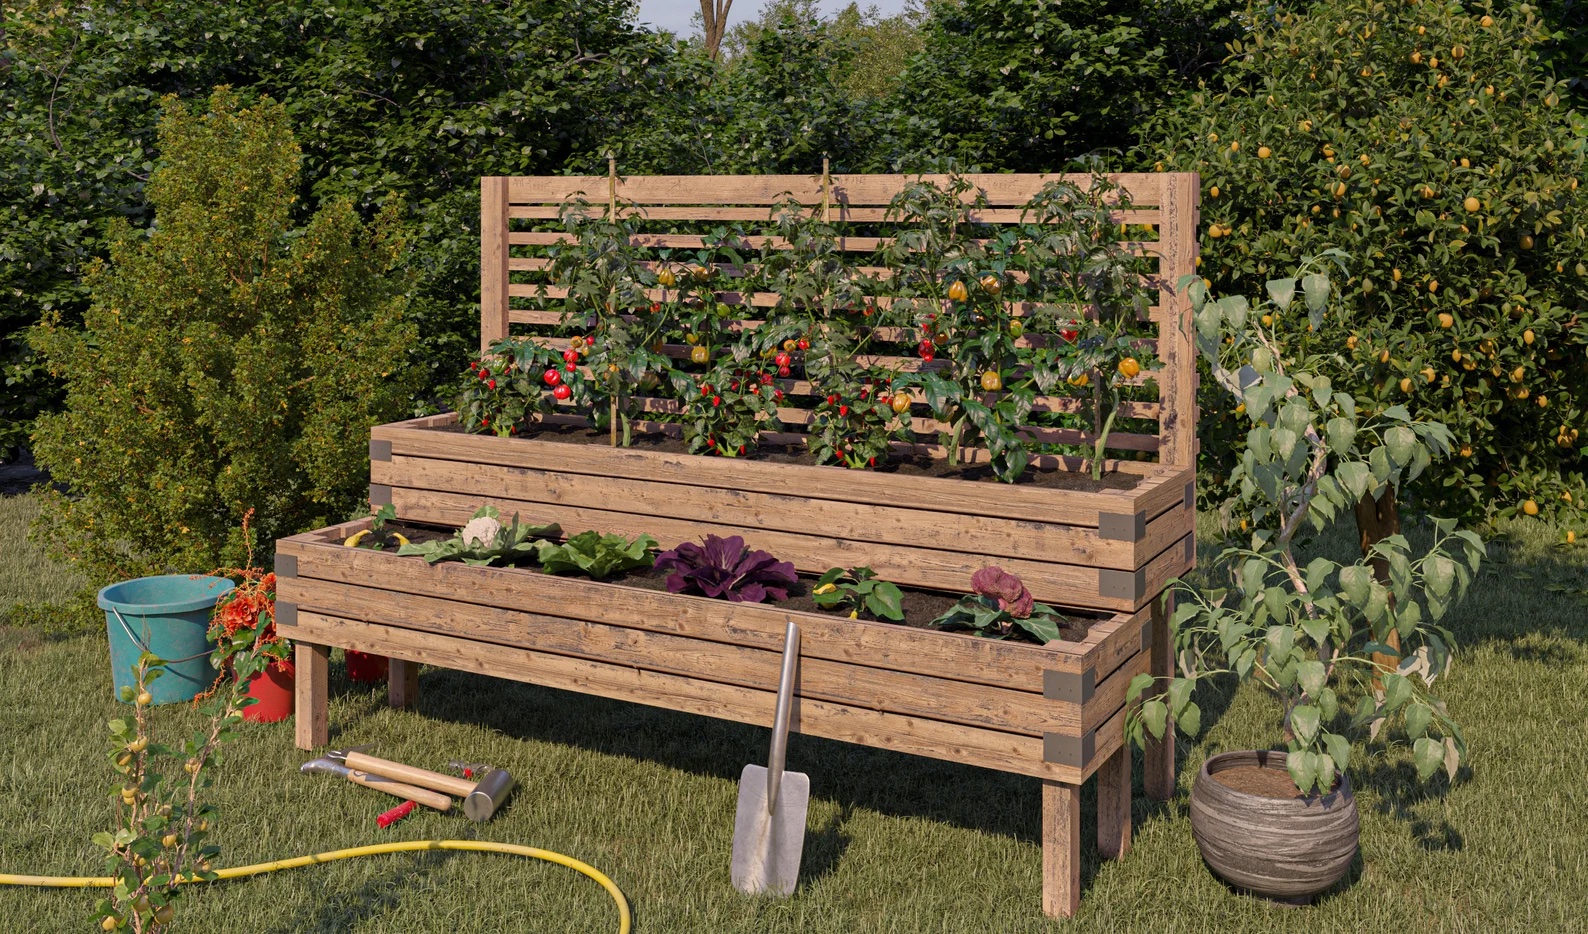 Wood raised garden bed with two tiers filled with growing vegetablesP; top tier has a trellis behind it.